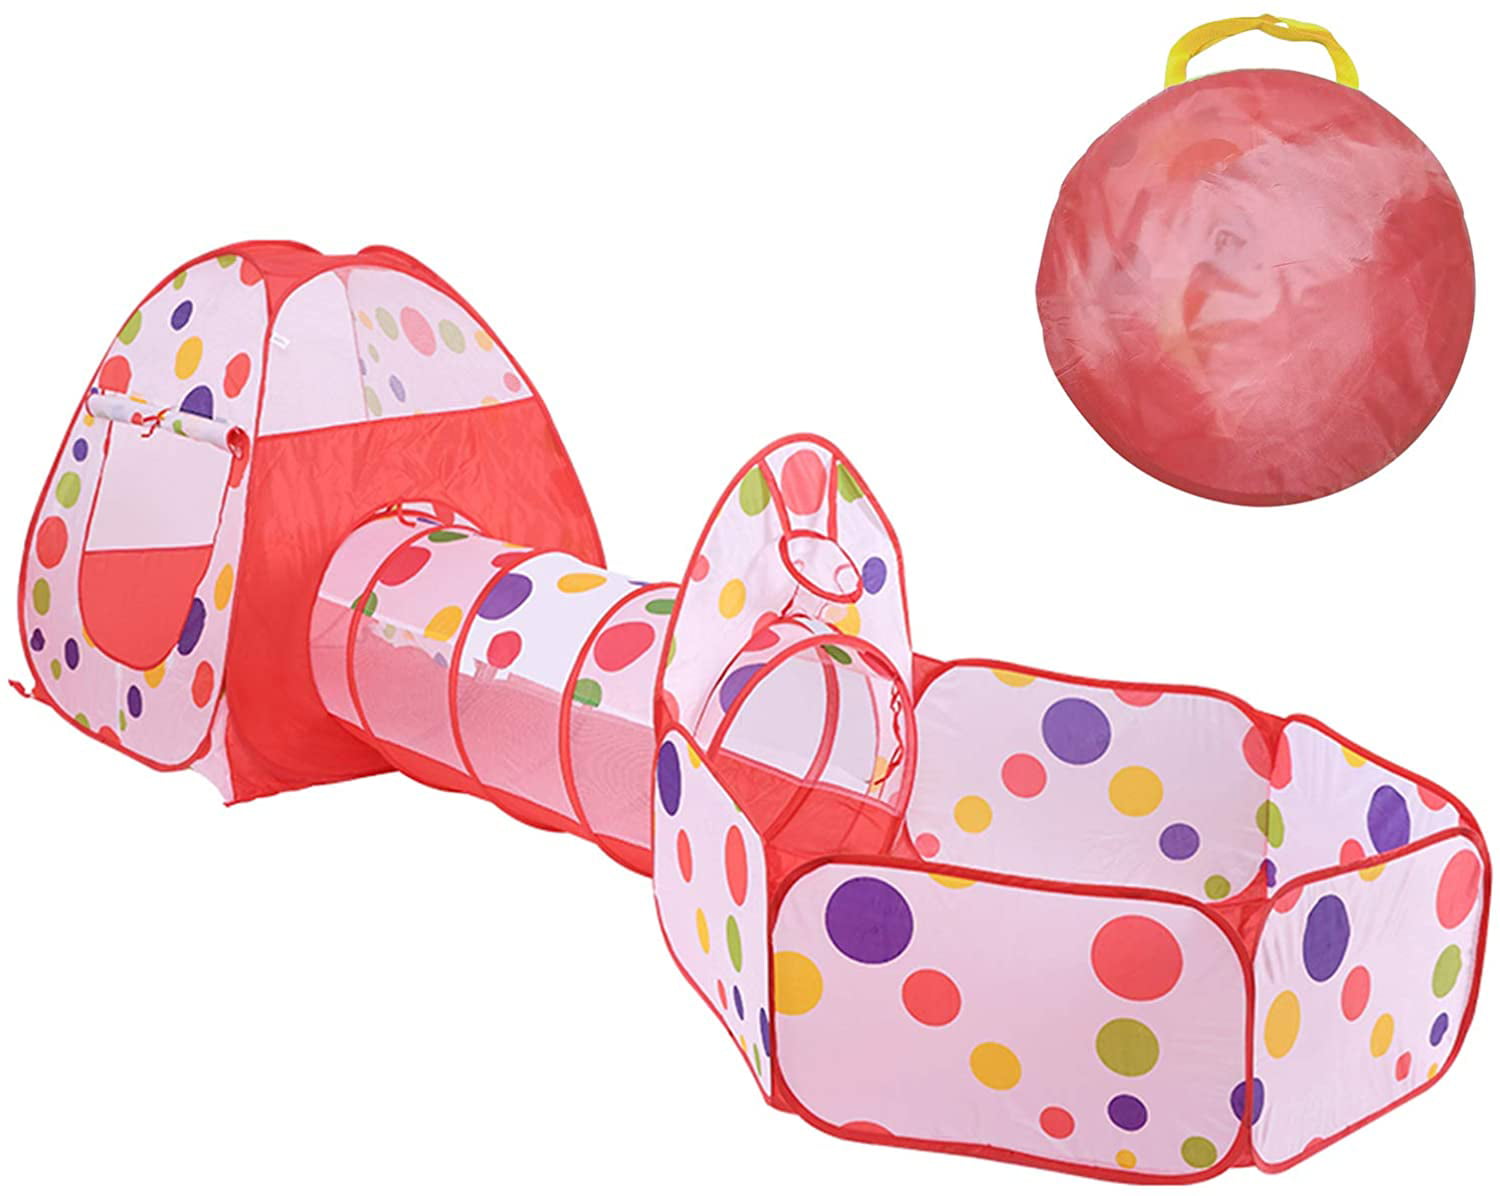 Details about   Girls Princess Fairy Tale Castle Play Tent Crawl Tunnel Ball Pit w/ Storage Case 